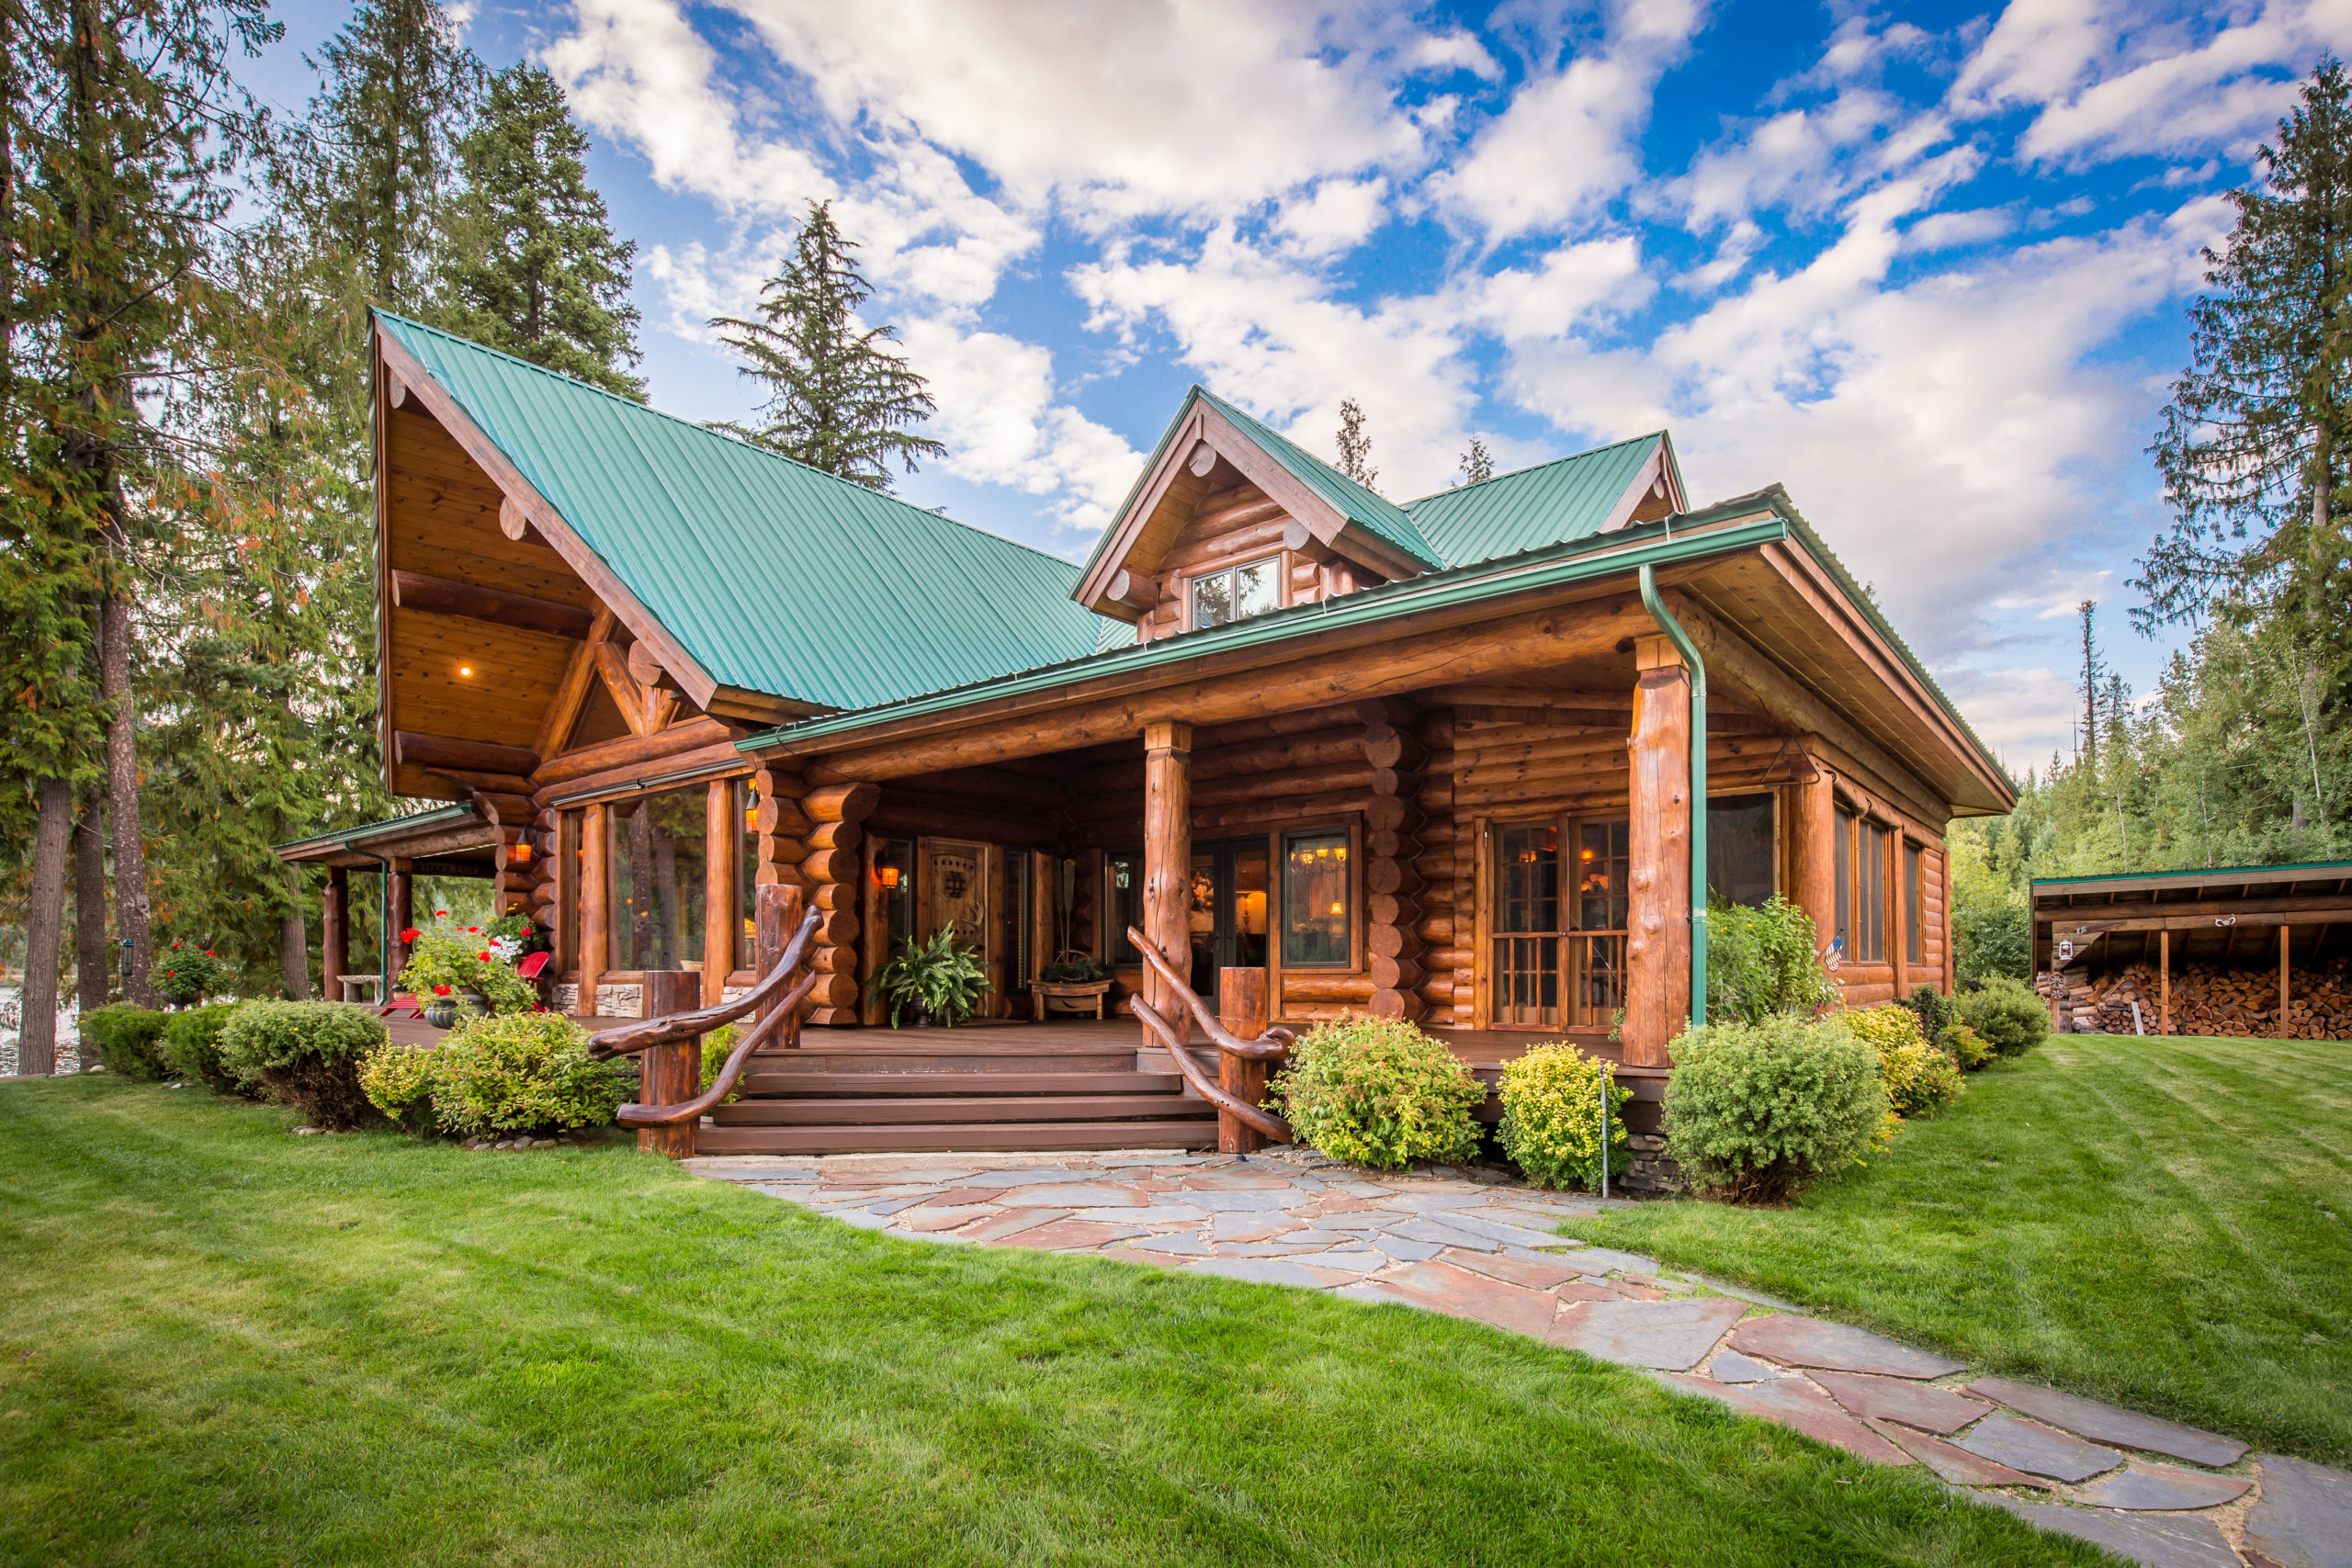 Fall In Love With The Beauty Of This Handcrafted Log Home